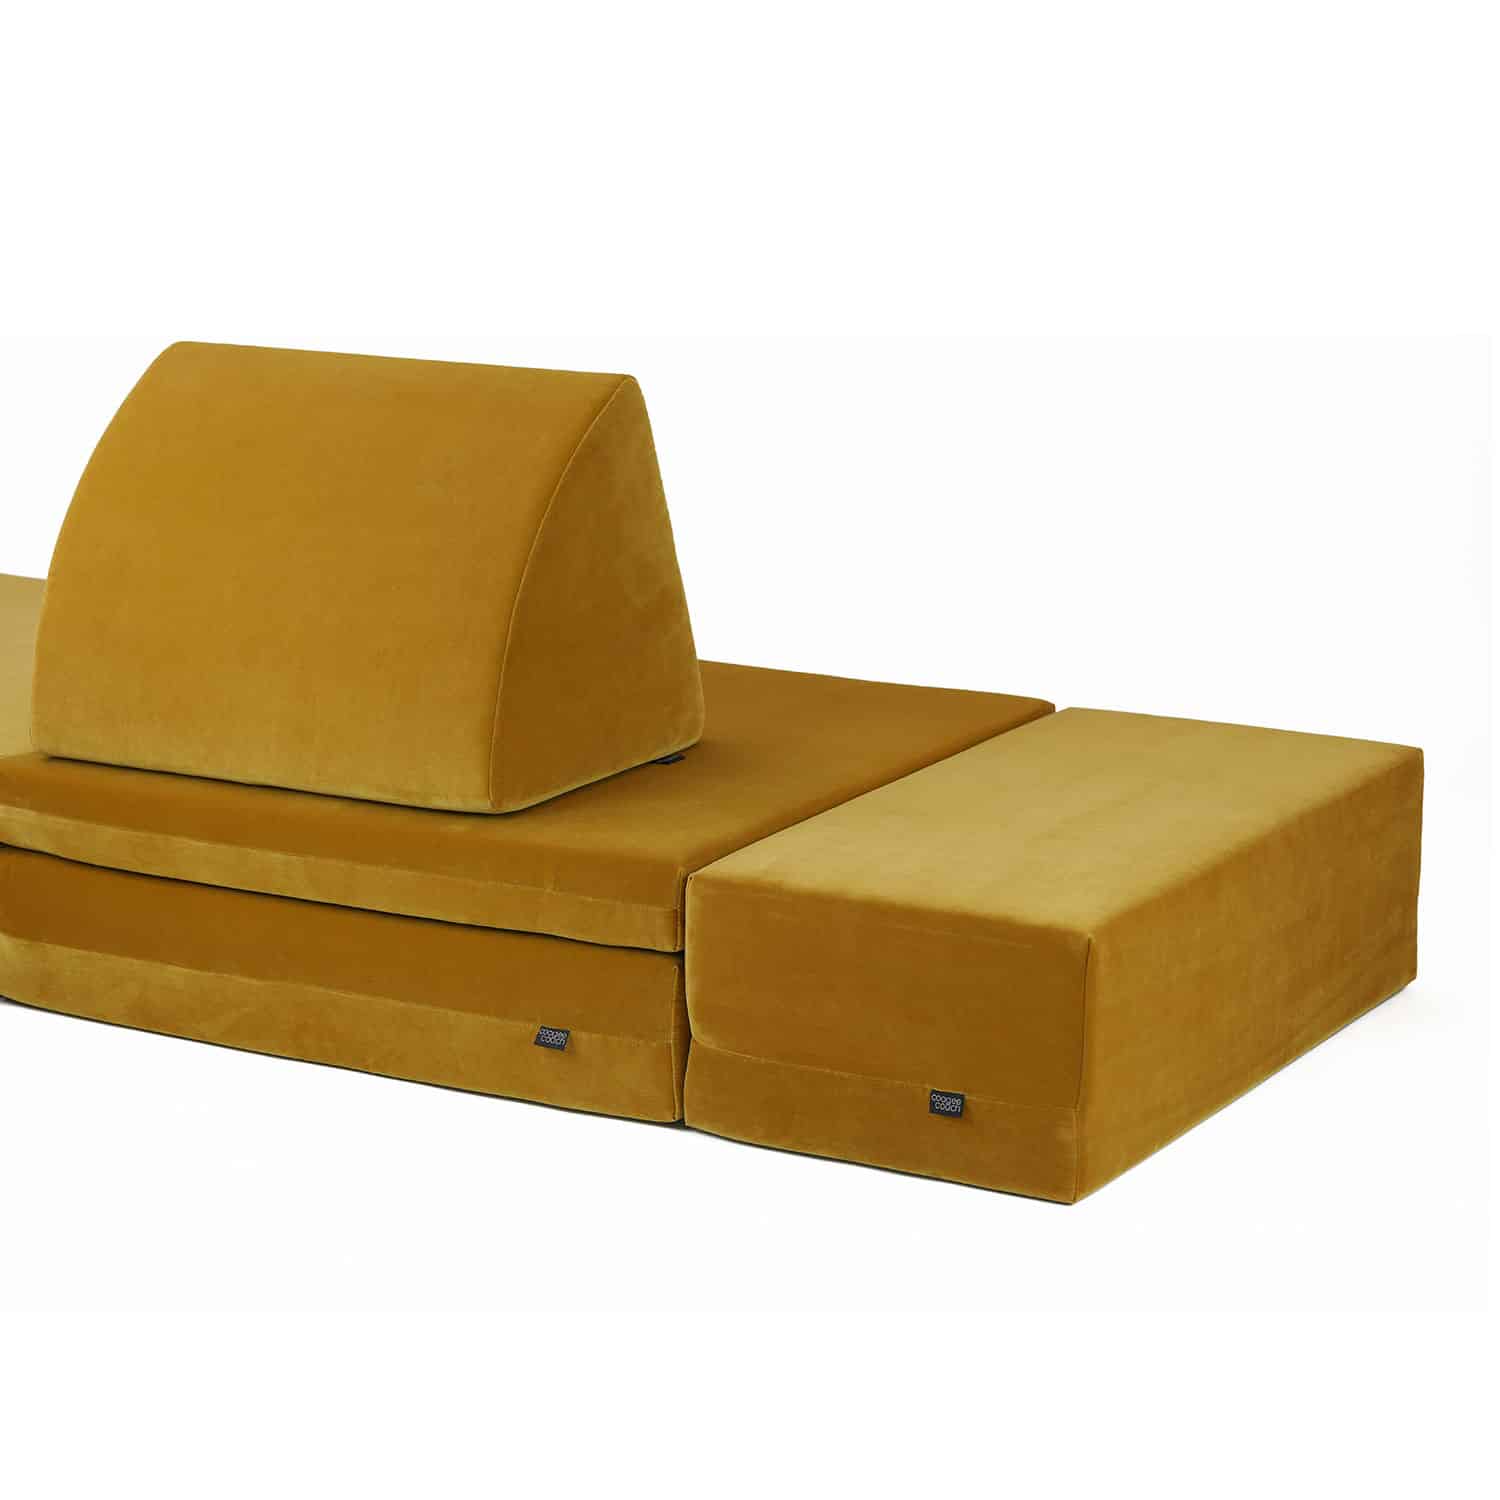 coogeecuboid | modular guest bed | series: tesoro-de-oro | color: amber-gold gold | view: extension coogeecouch guest bed + pillow | made in Germany